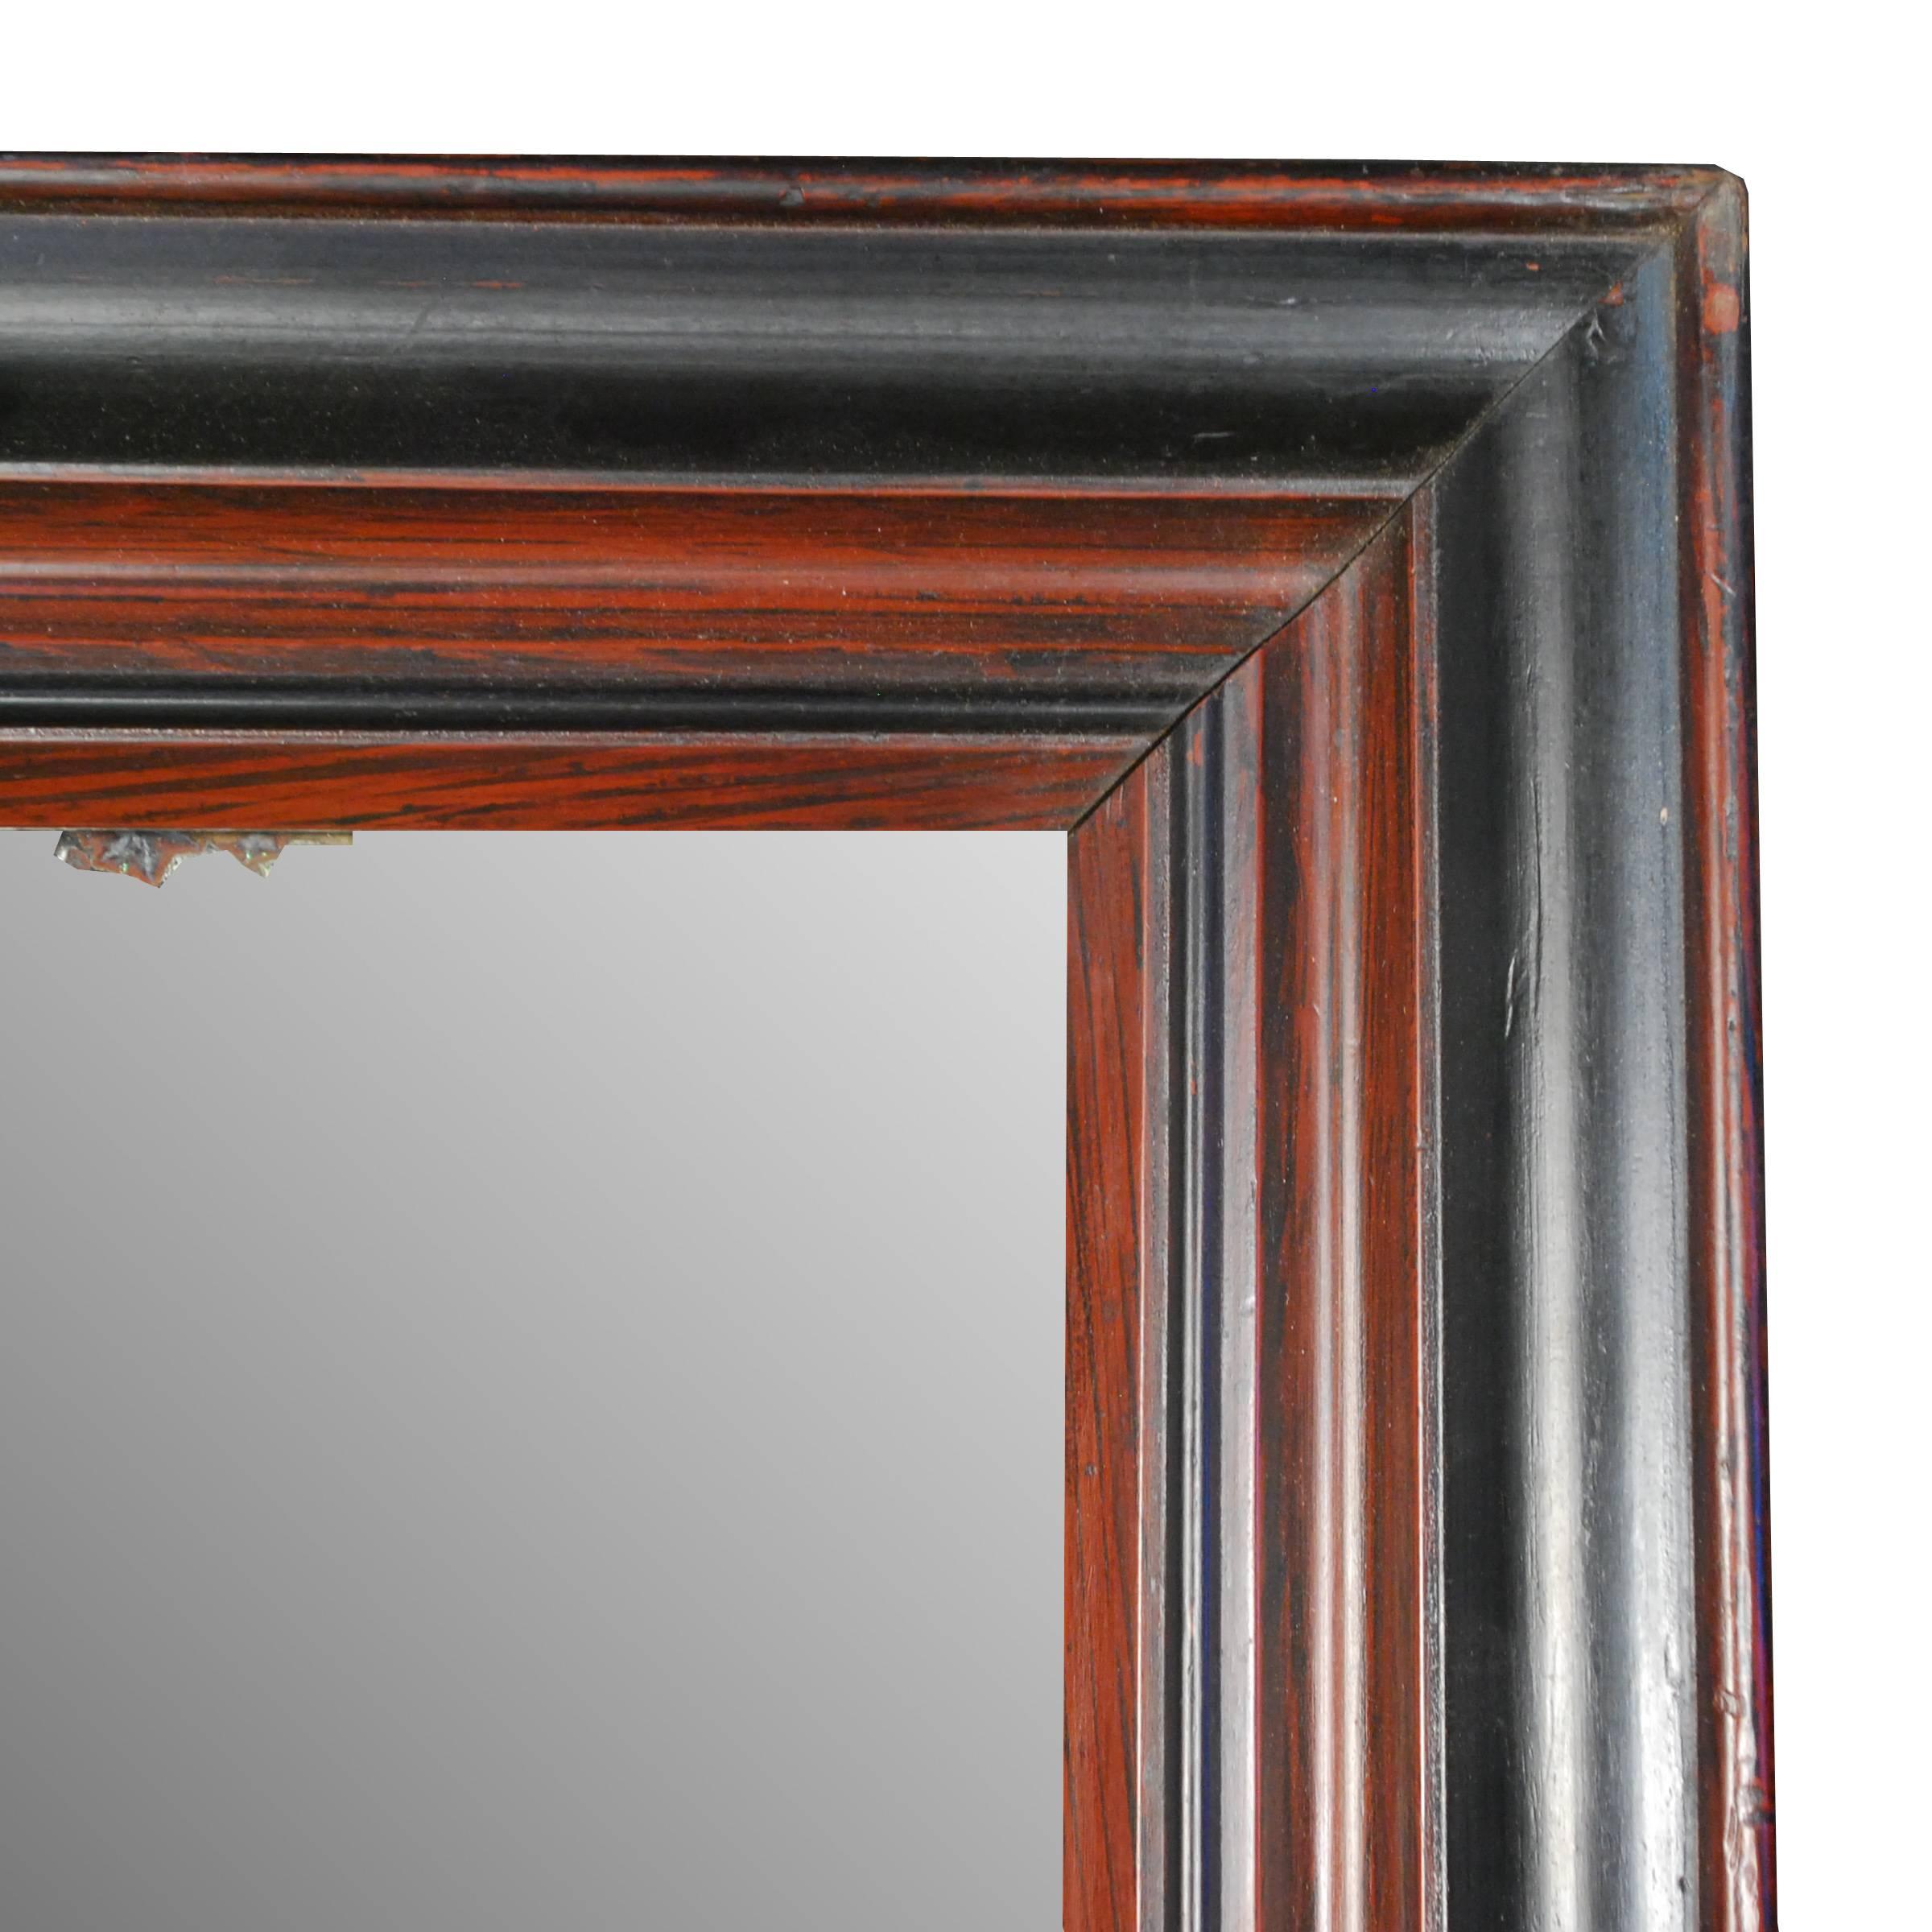 This early 20th century Chinese mirror has maintained its original 